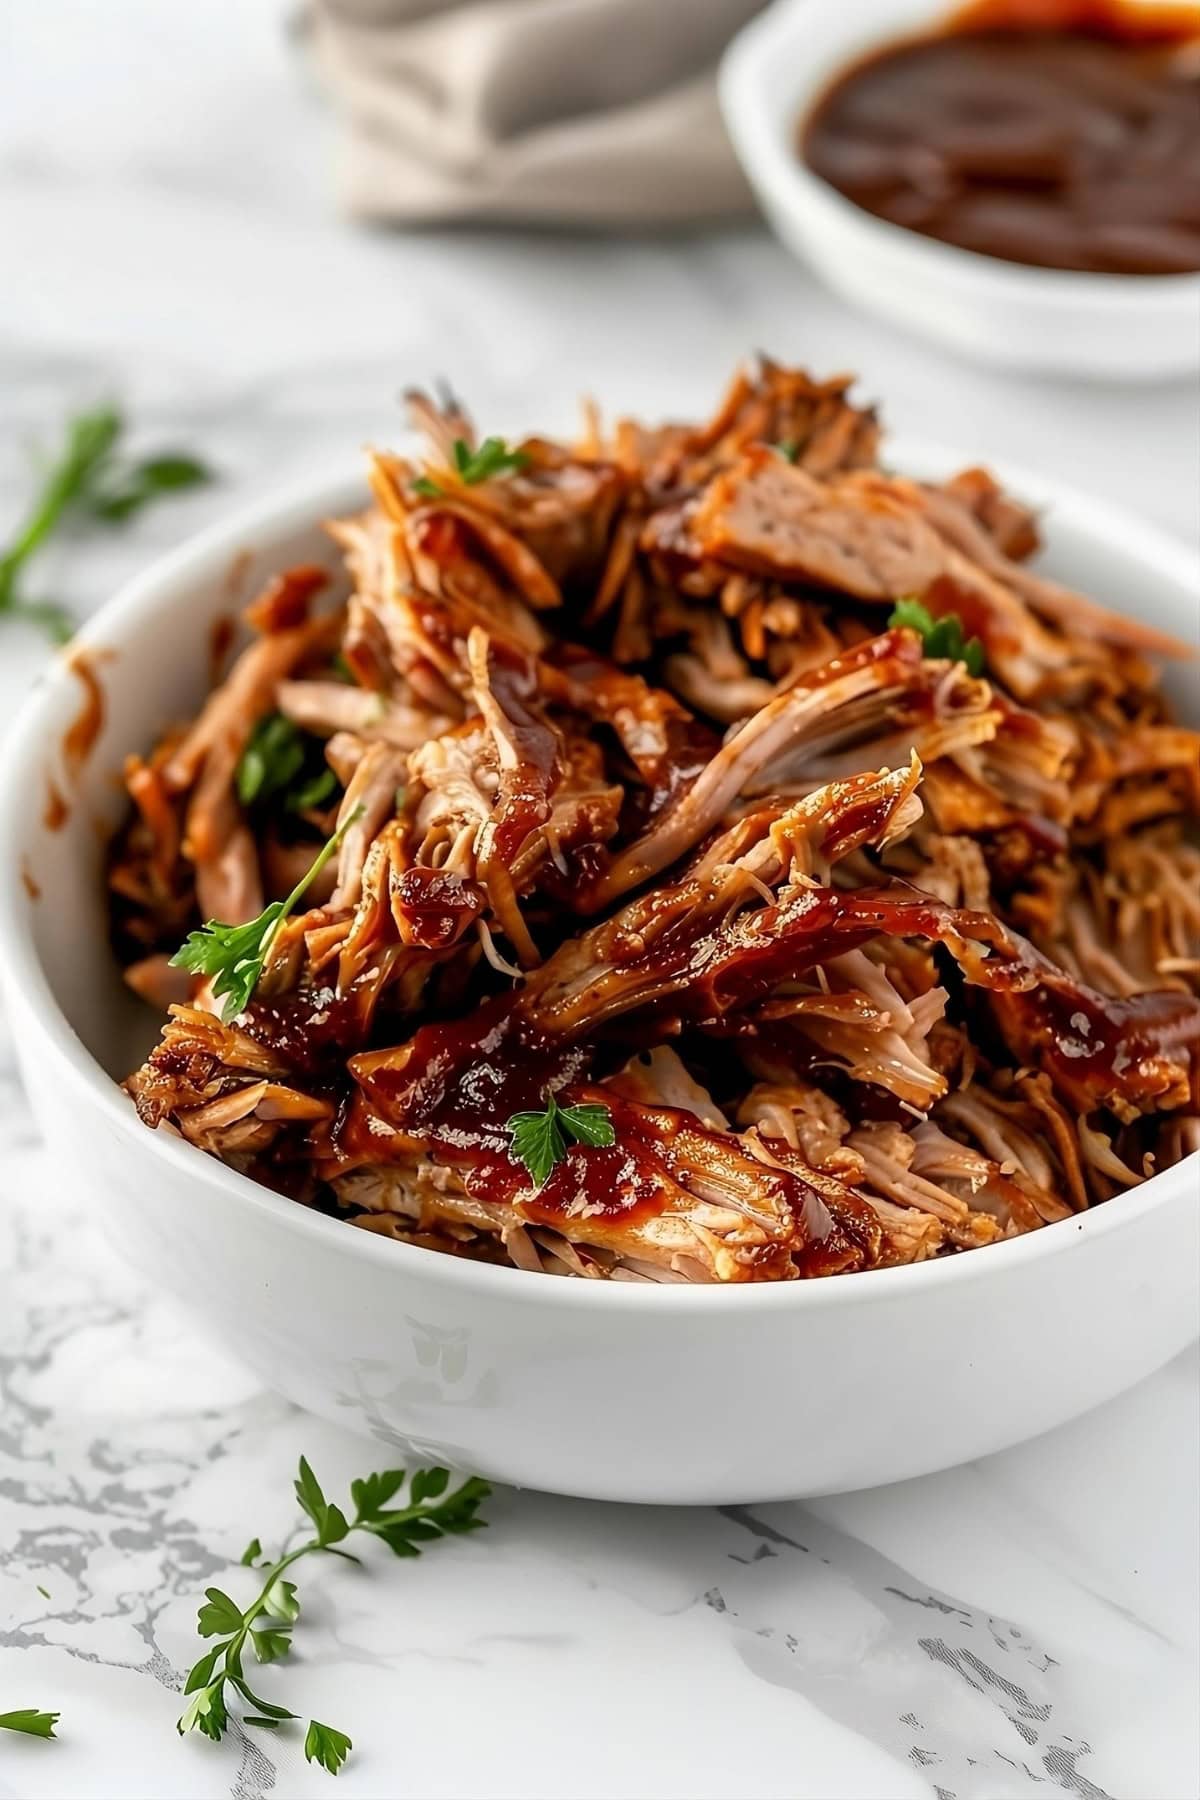 Barbeque sauce flavored pulled pork in a white bowl.